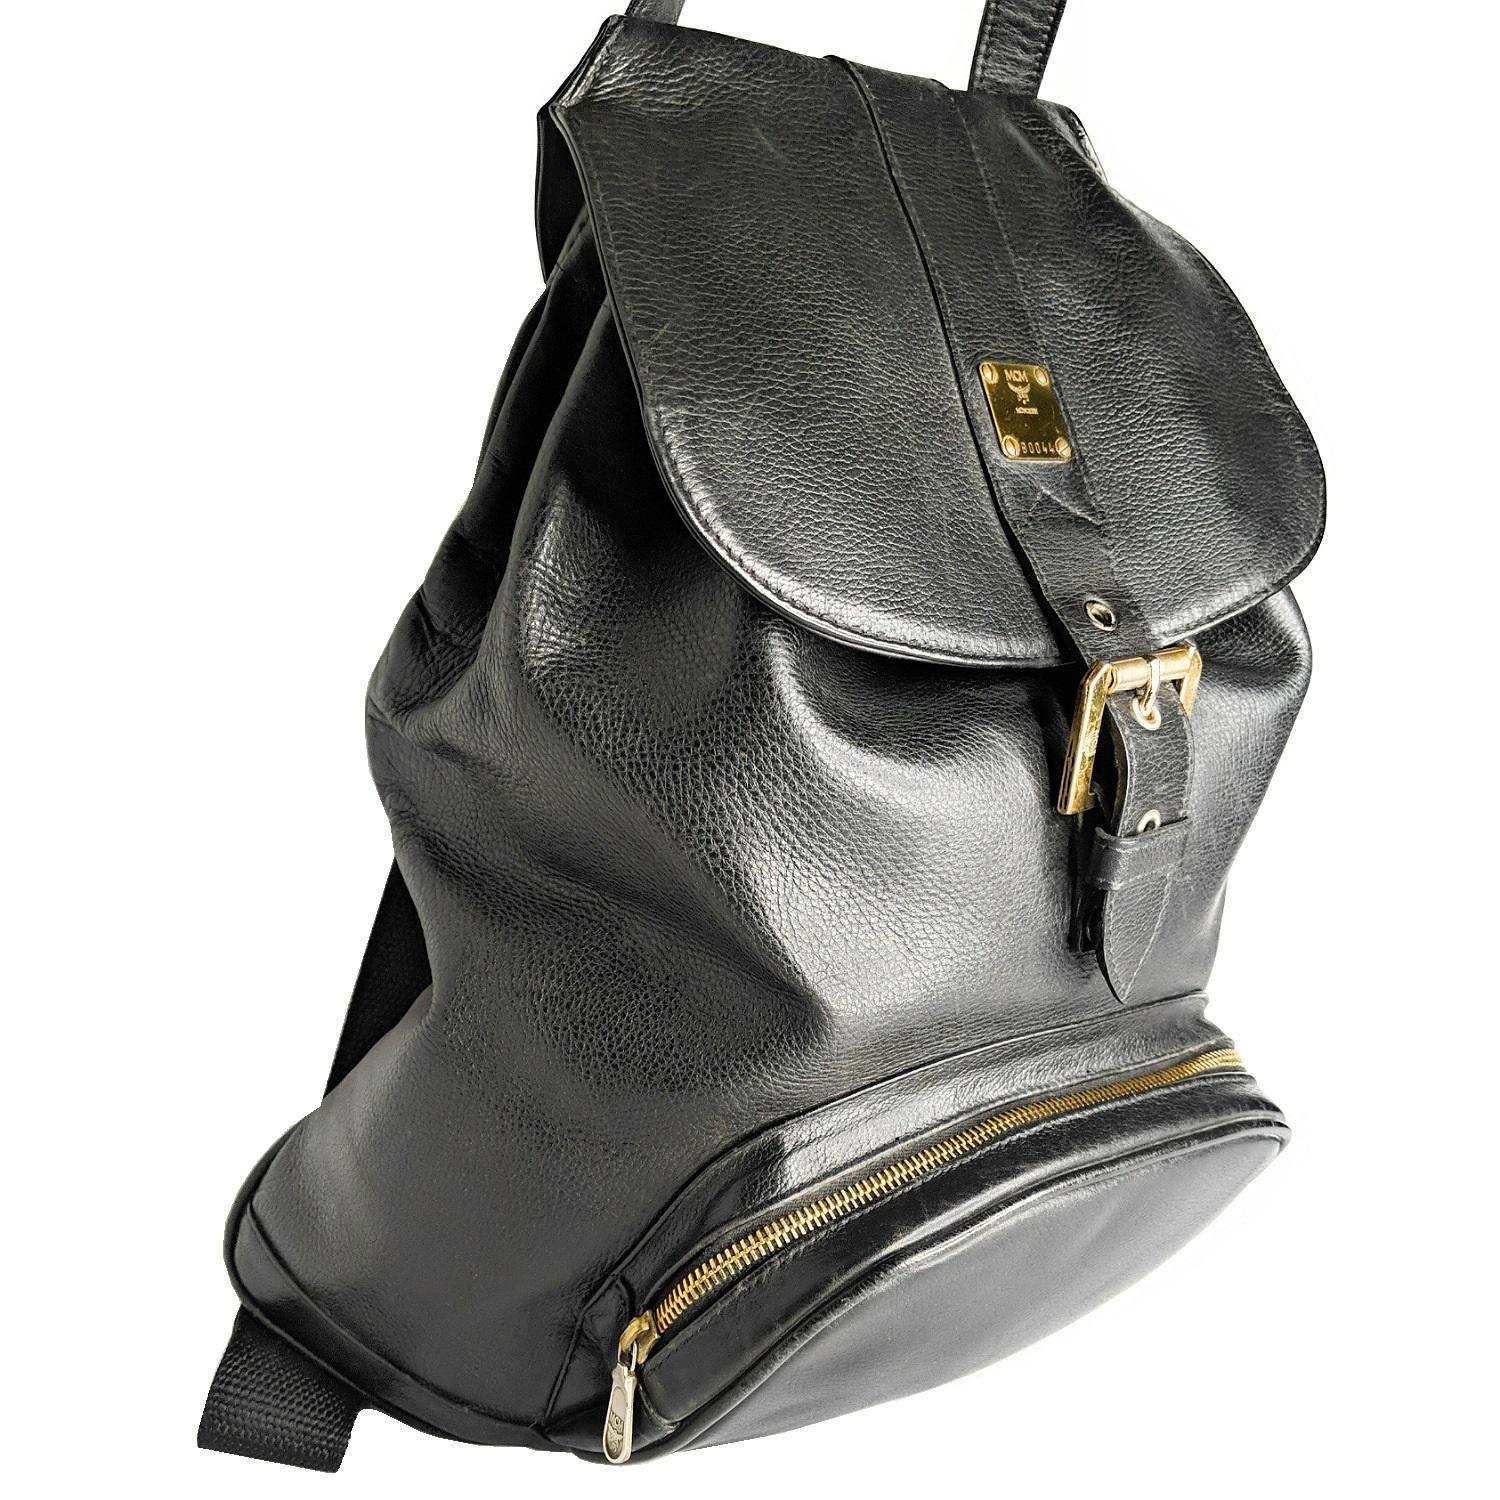 This is the vintage MCM black genuine leather backpack from the 80's, unisex use for all generations. If you are looking for an old school MCM bag from that era, then this will be a must-have piece for sure! Always with the traveler in mind, this